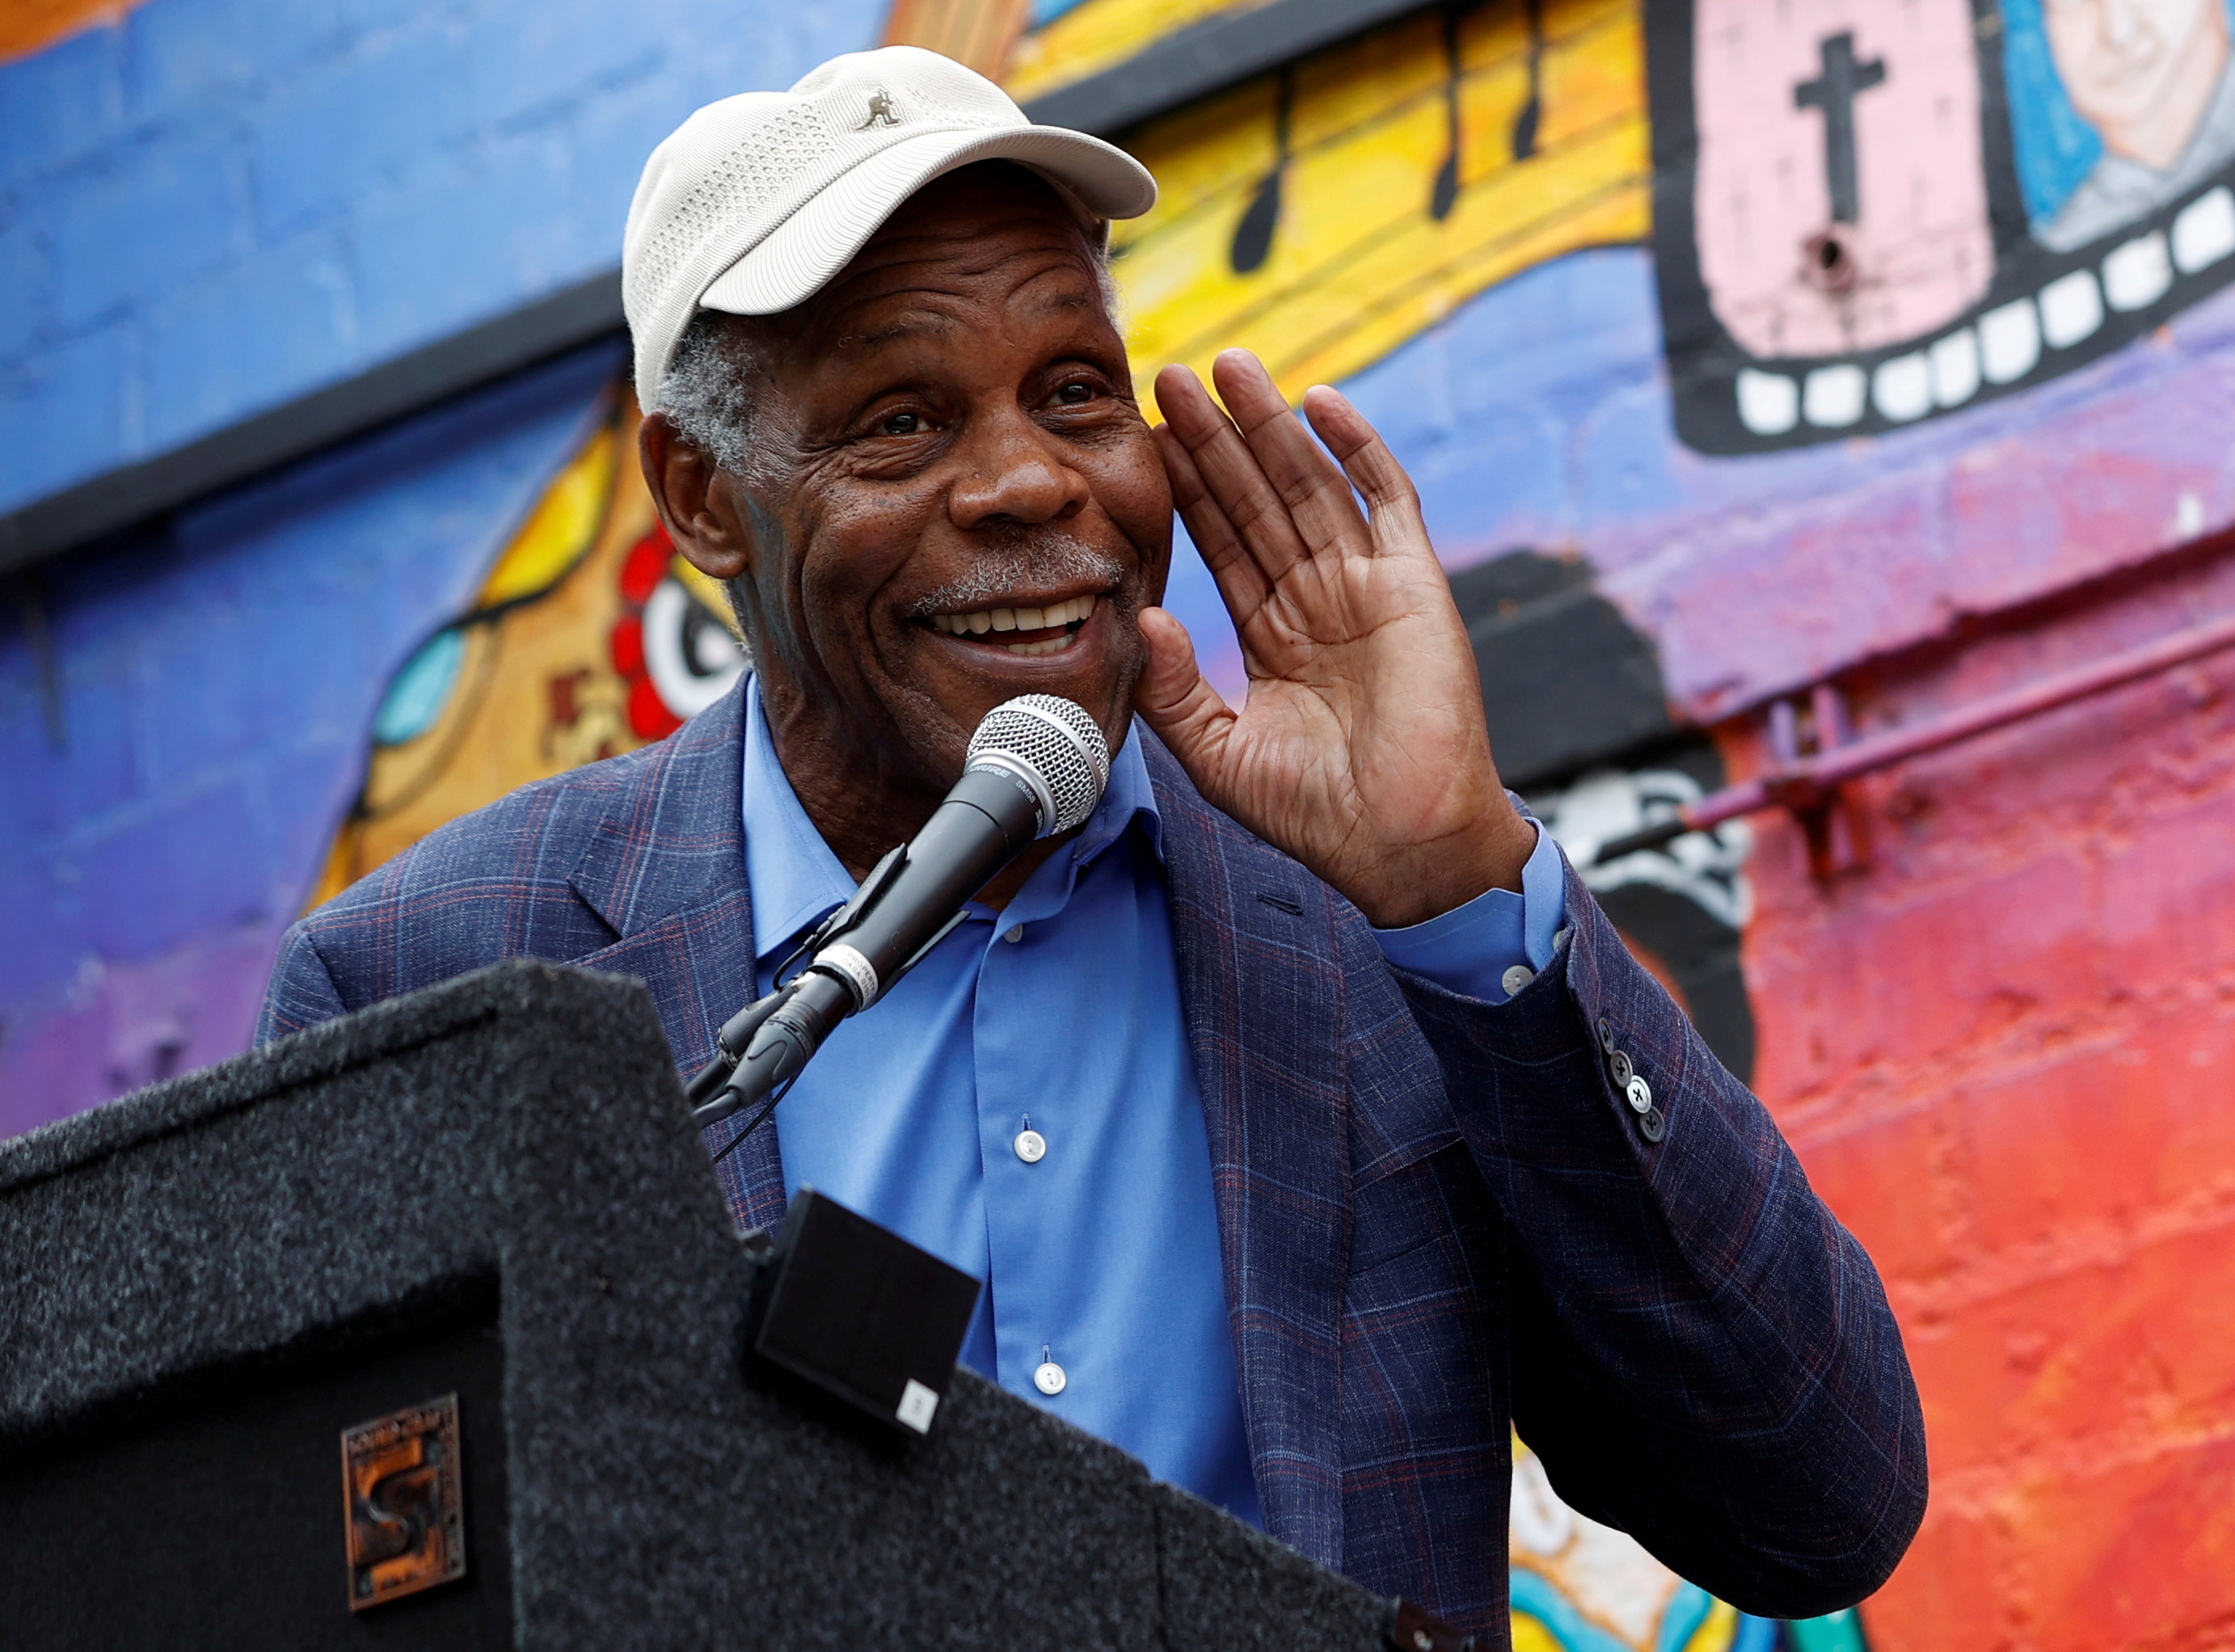 Actor and activist Danny Glover speaks at a press conference to support State Senate Bill 805 